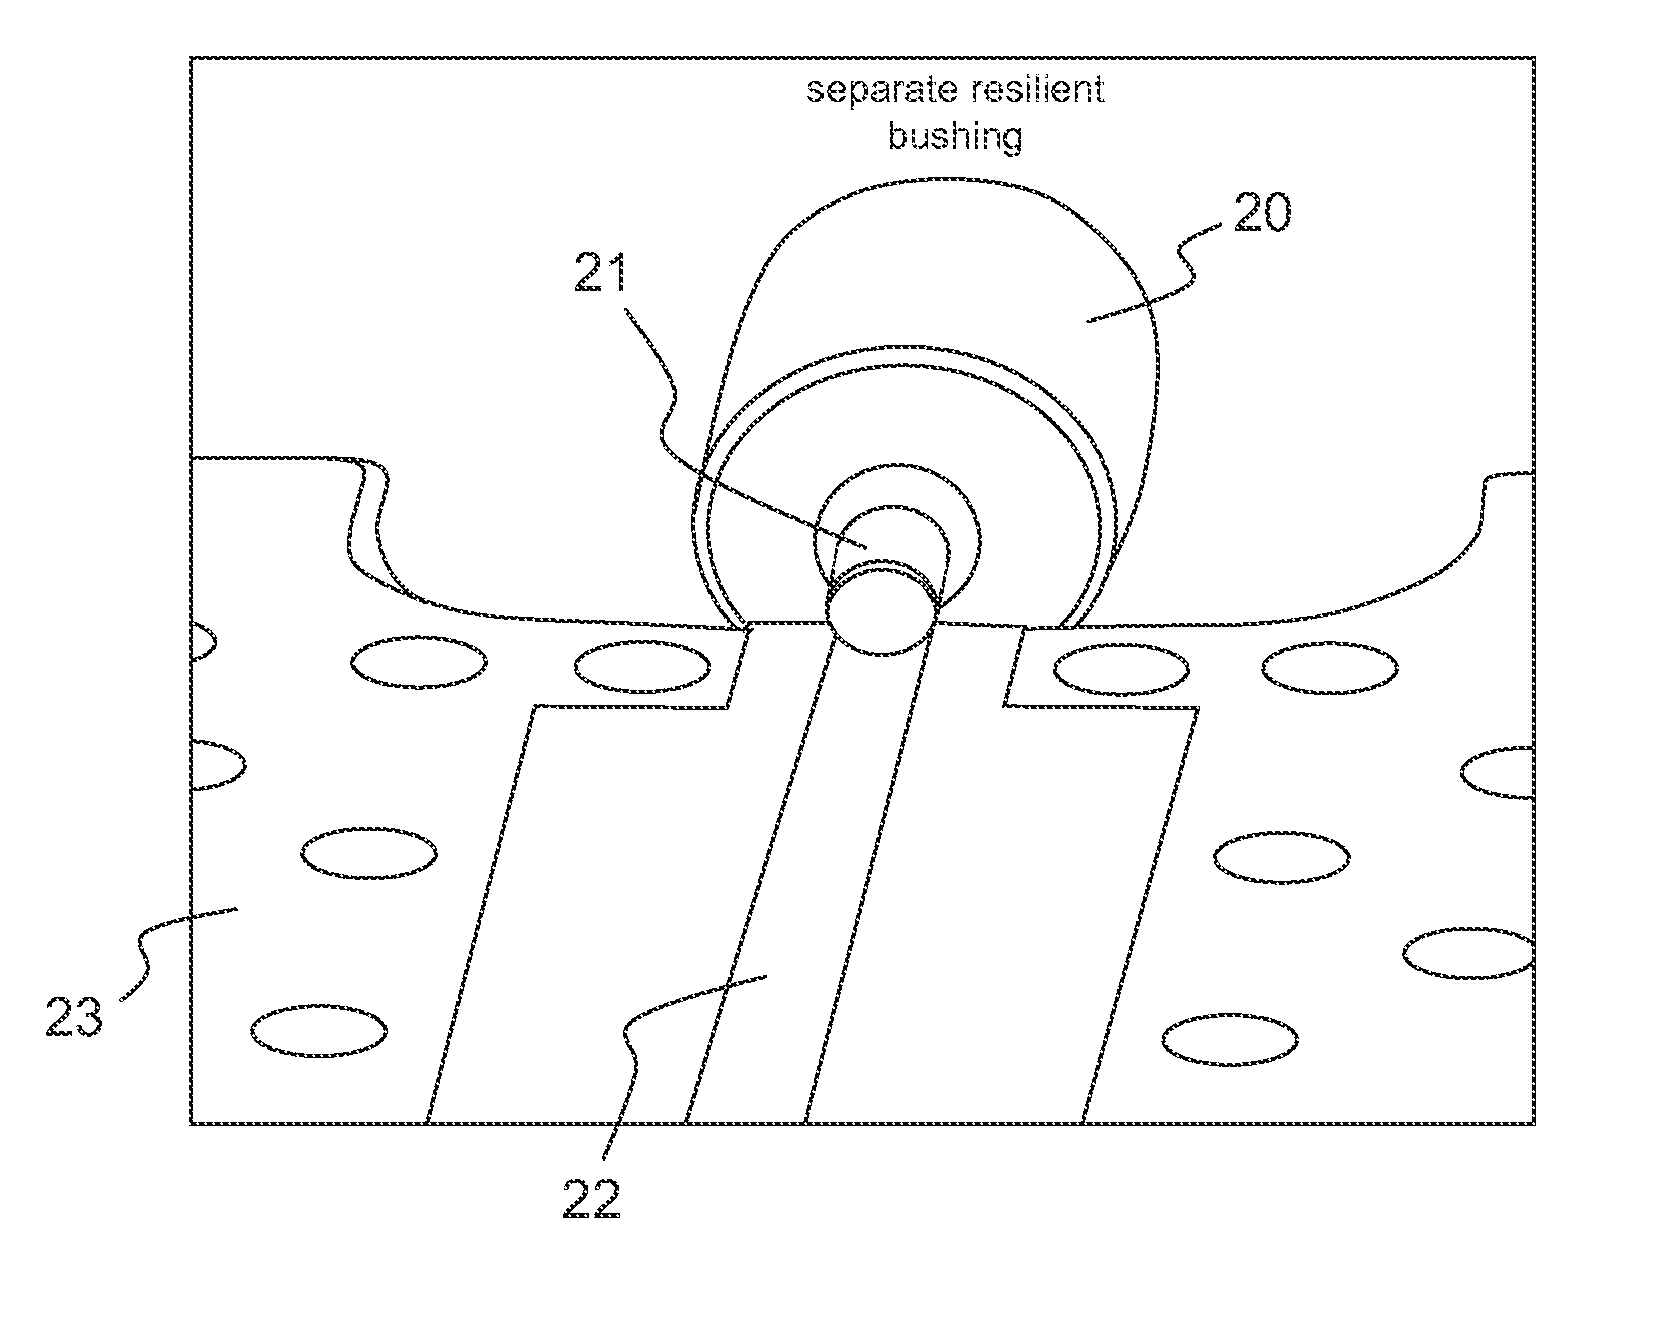 Electromagnetic protection device able to protect a microwave connection between a connector and a microwave element